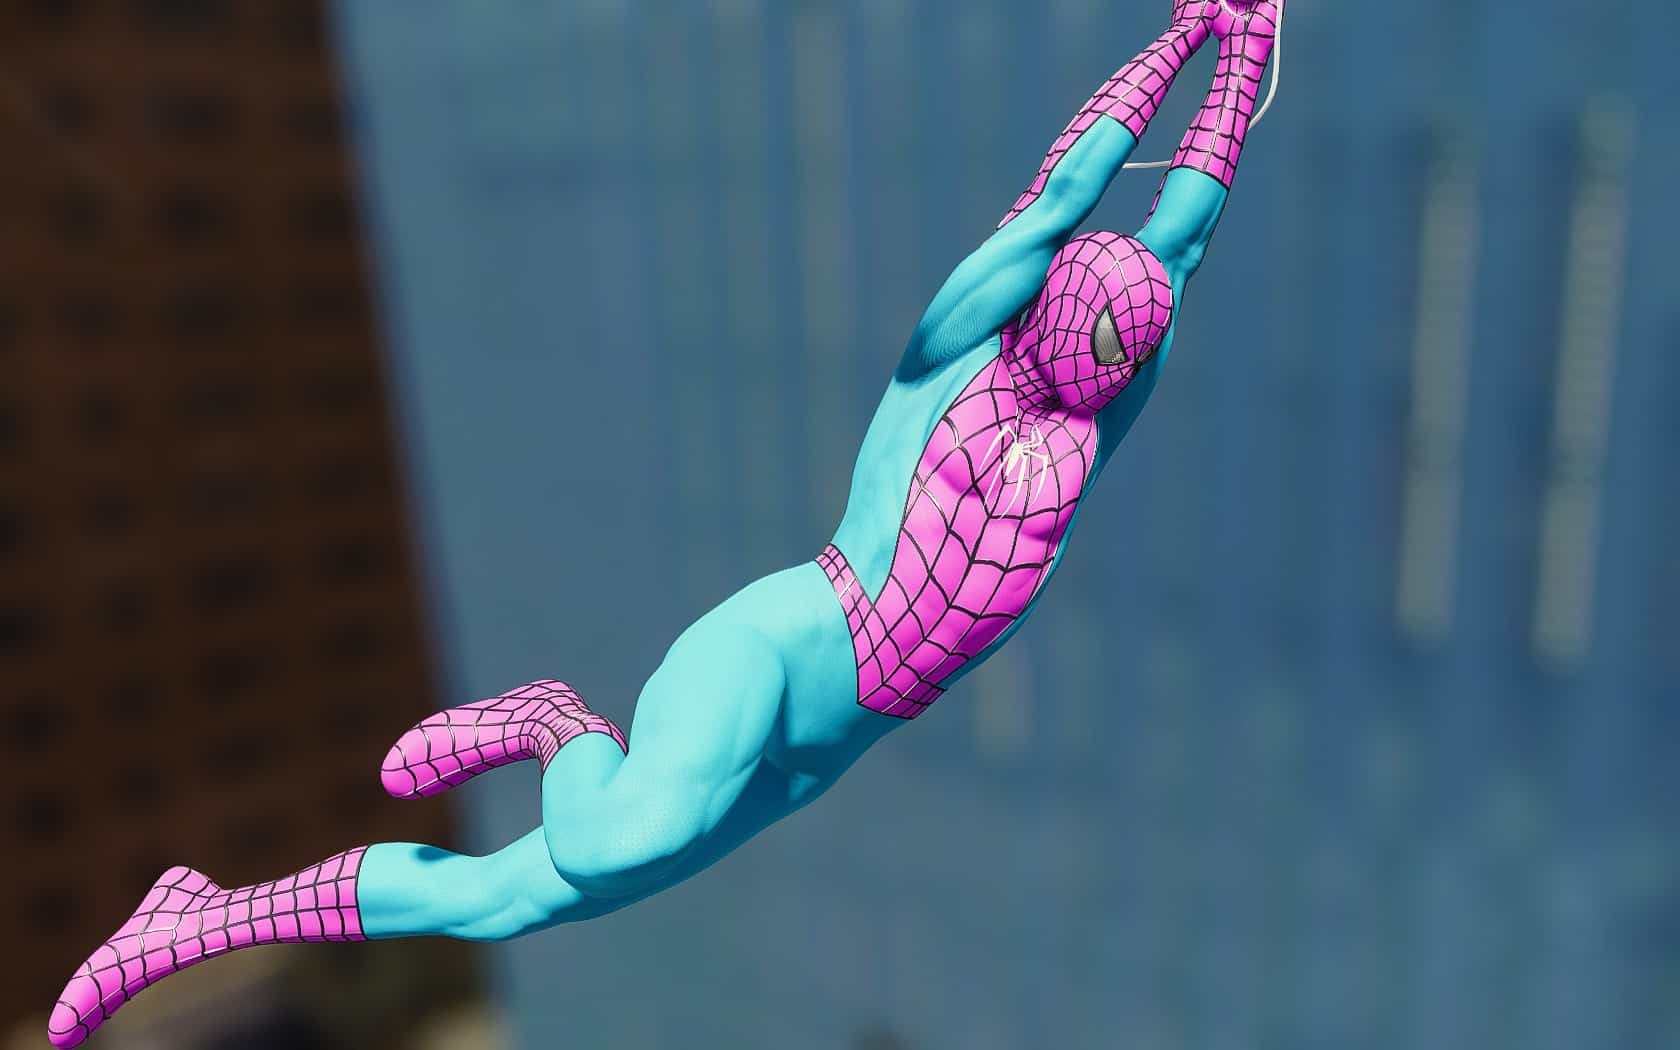 Spider-Man's Sam Raimi suit with the colours of the trans flag